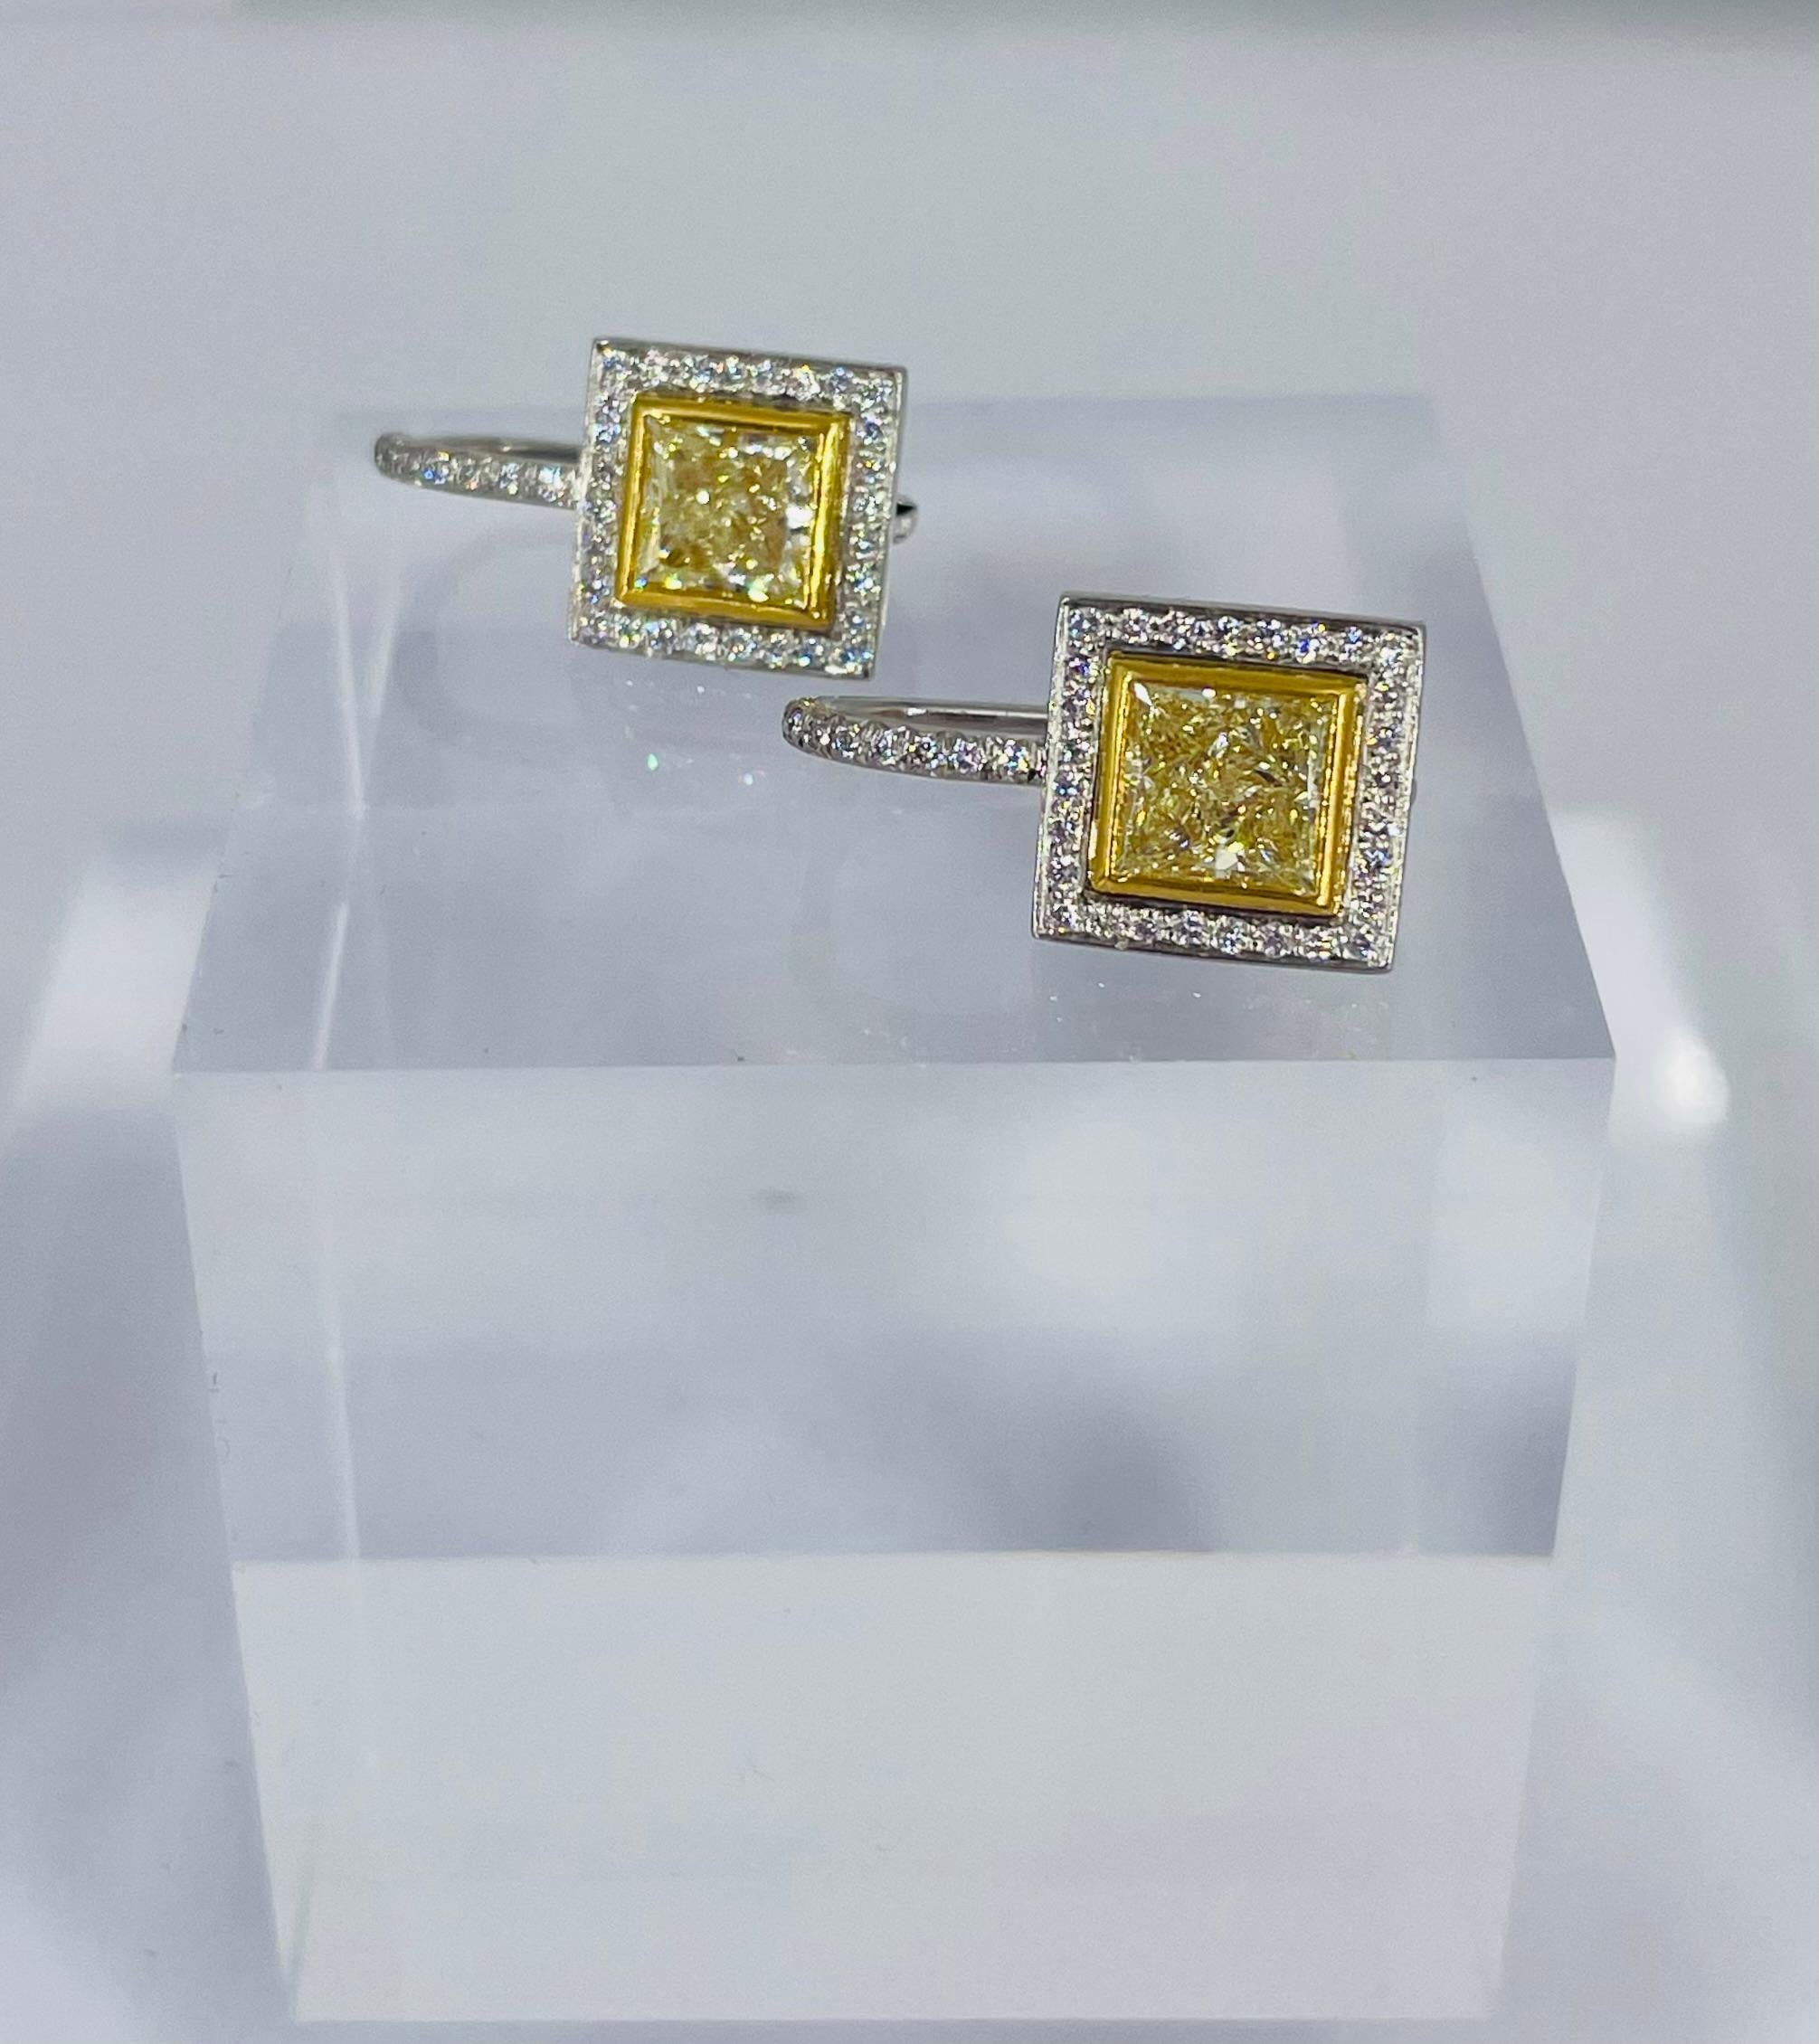 These sophisticated earrings by J. Birnbach are the perfect piece to add sparkle and color to any ensemble! Striking and sleek, this pair of earrings features fancy yellow princess cut diamonds (total 1.90 carats) with a white pave halo frame. The